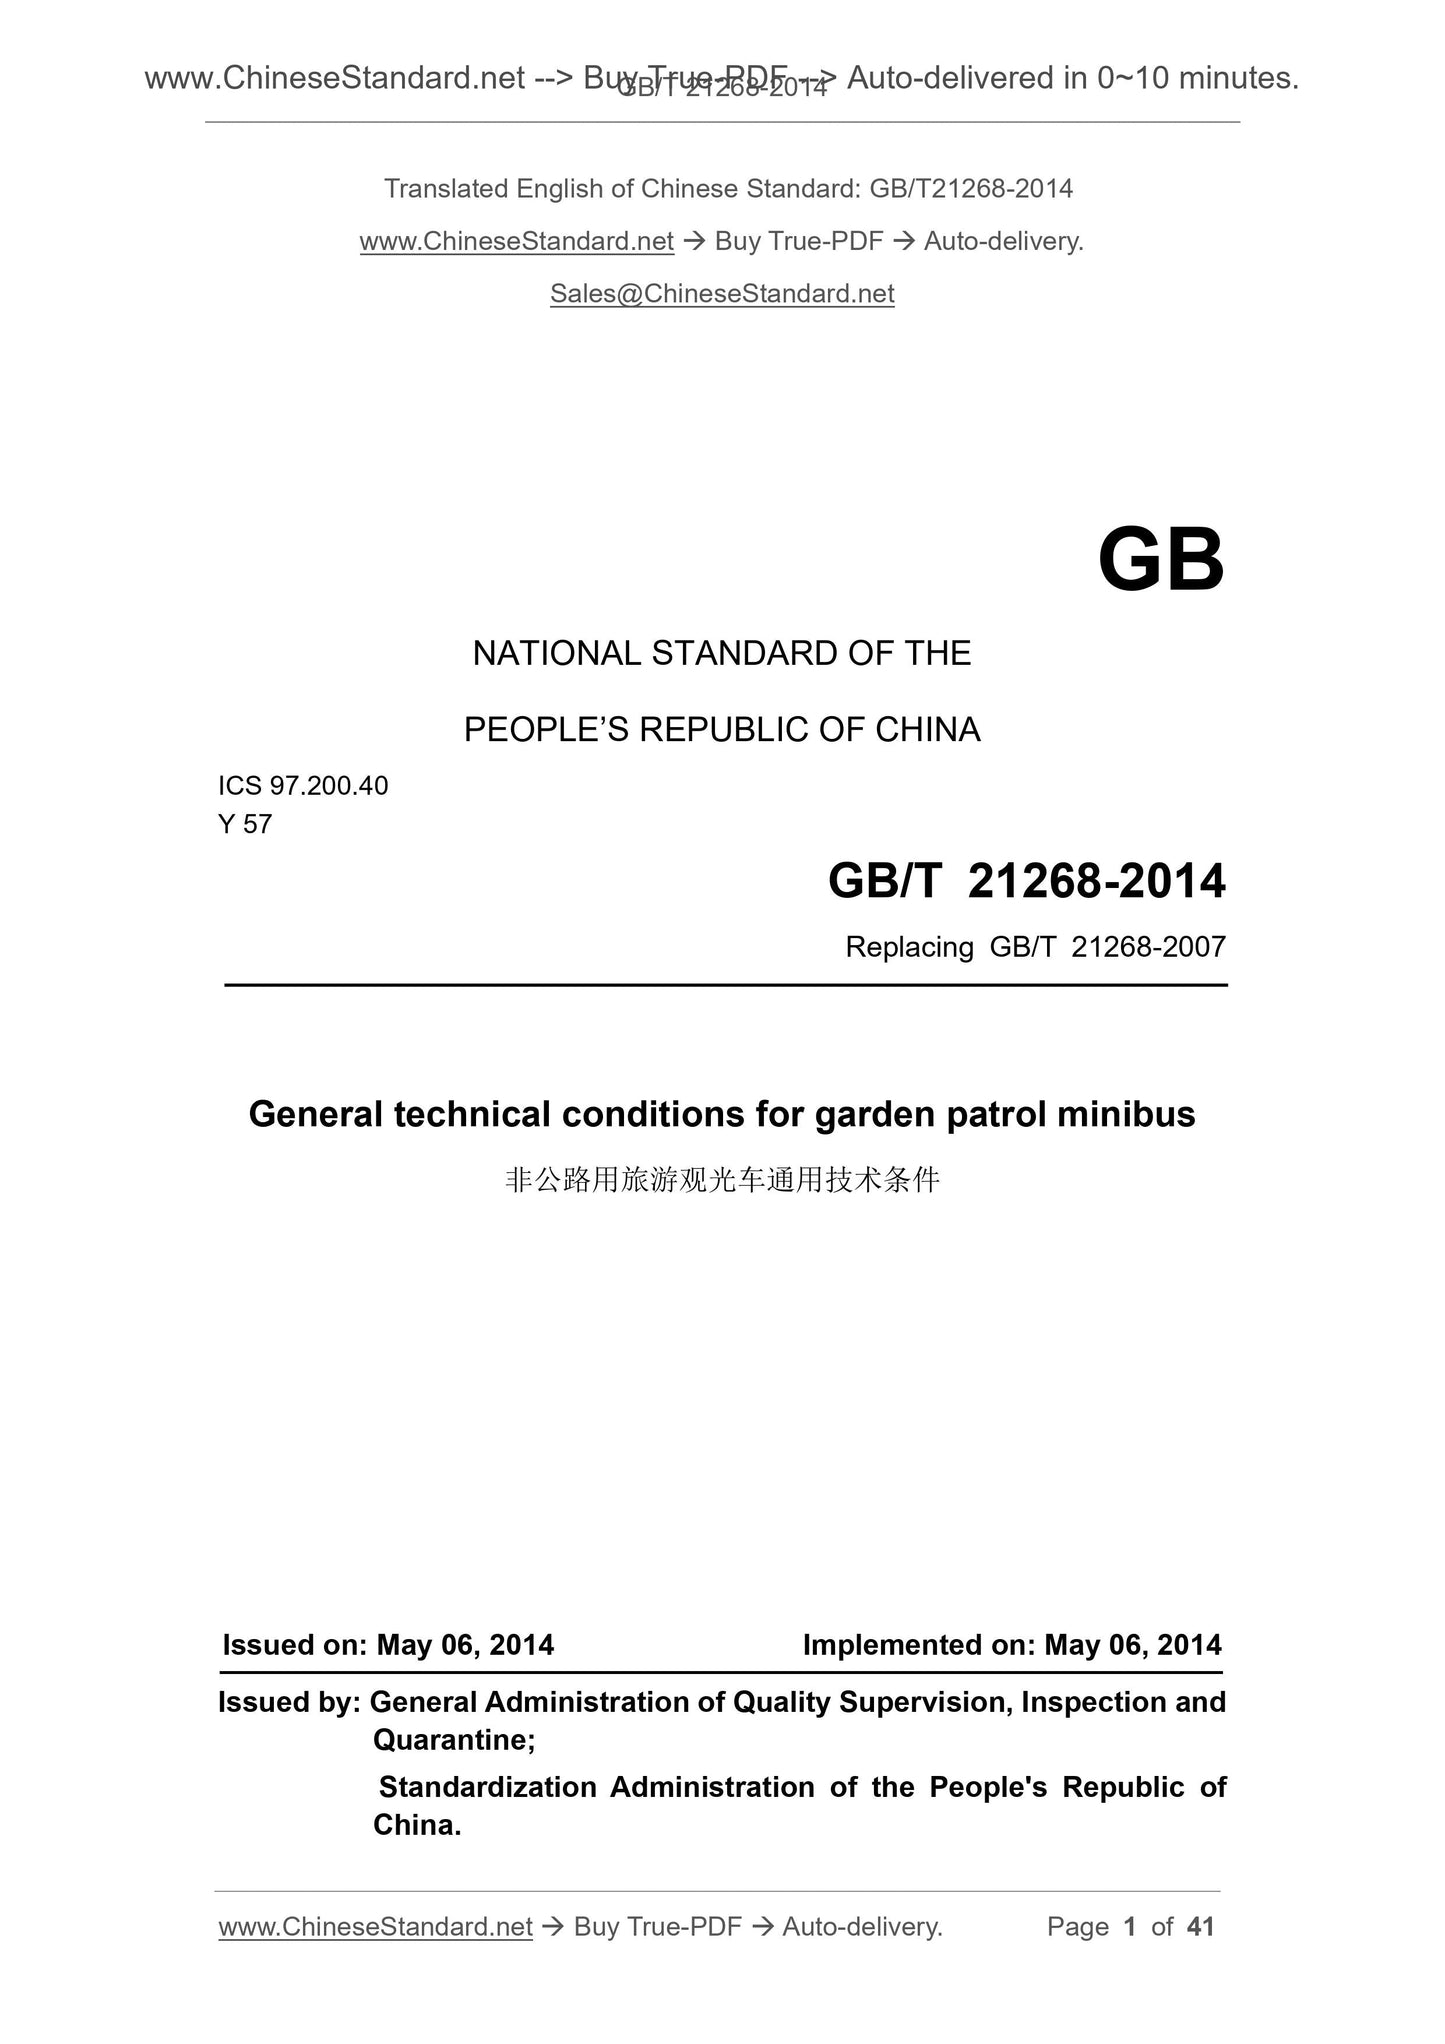 GB/T 21268-2014 Page 1